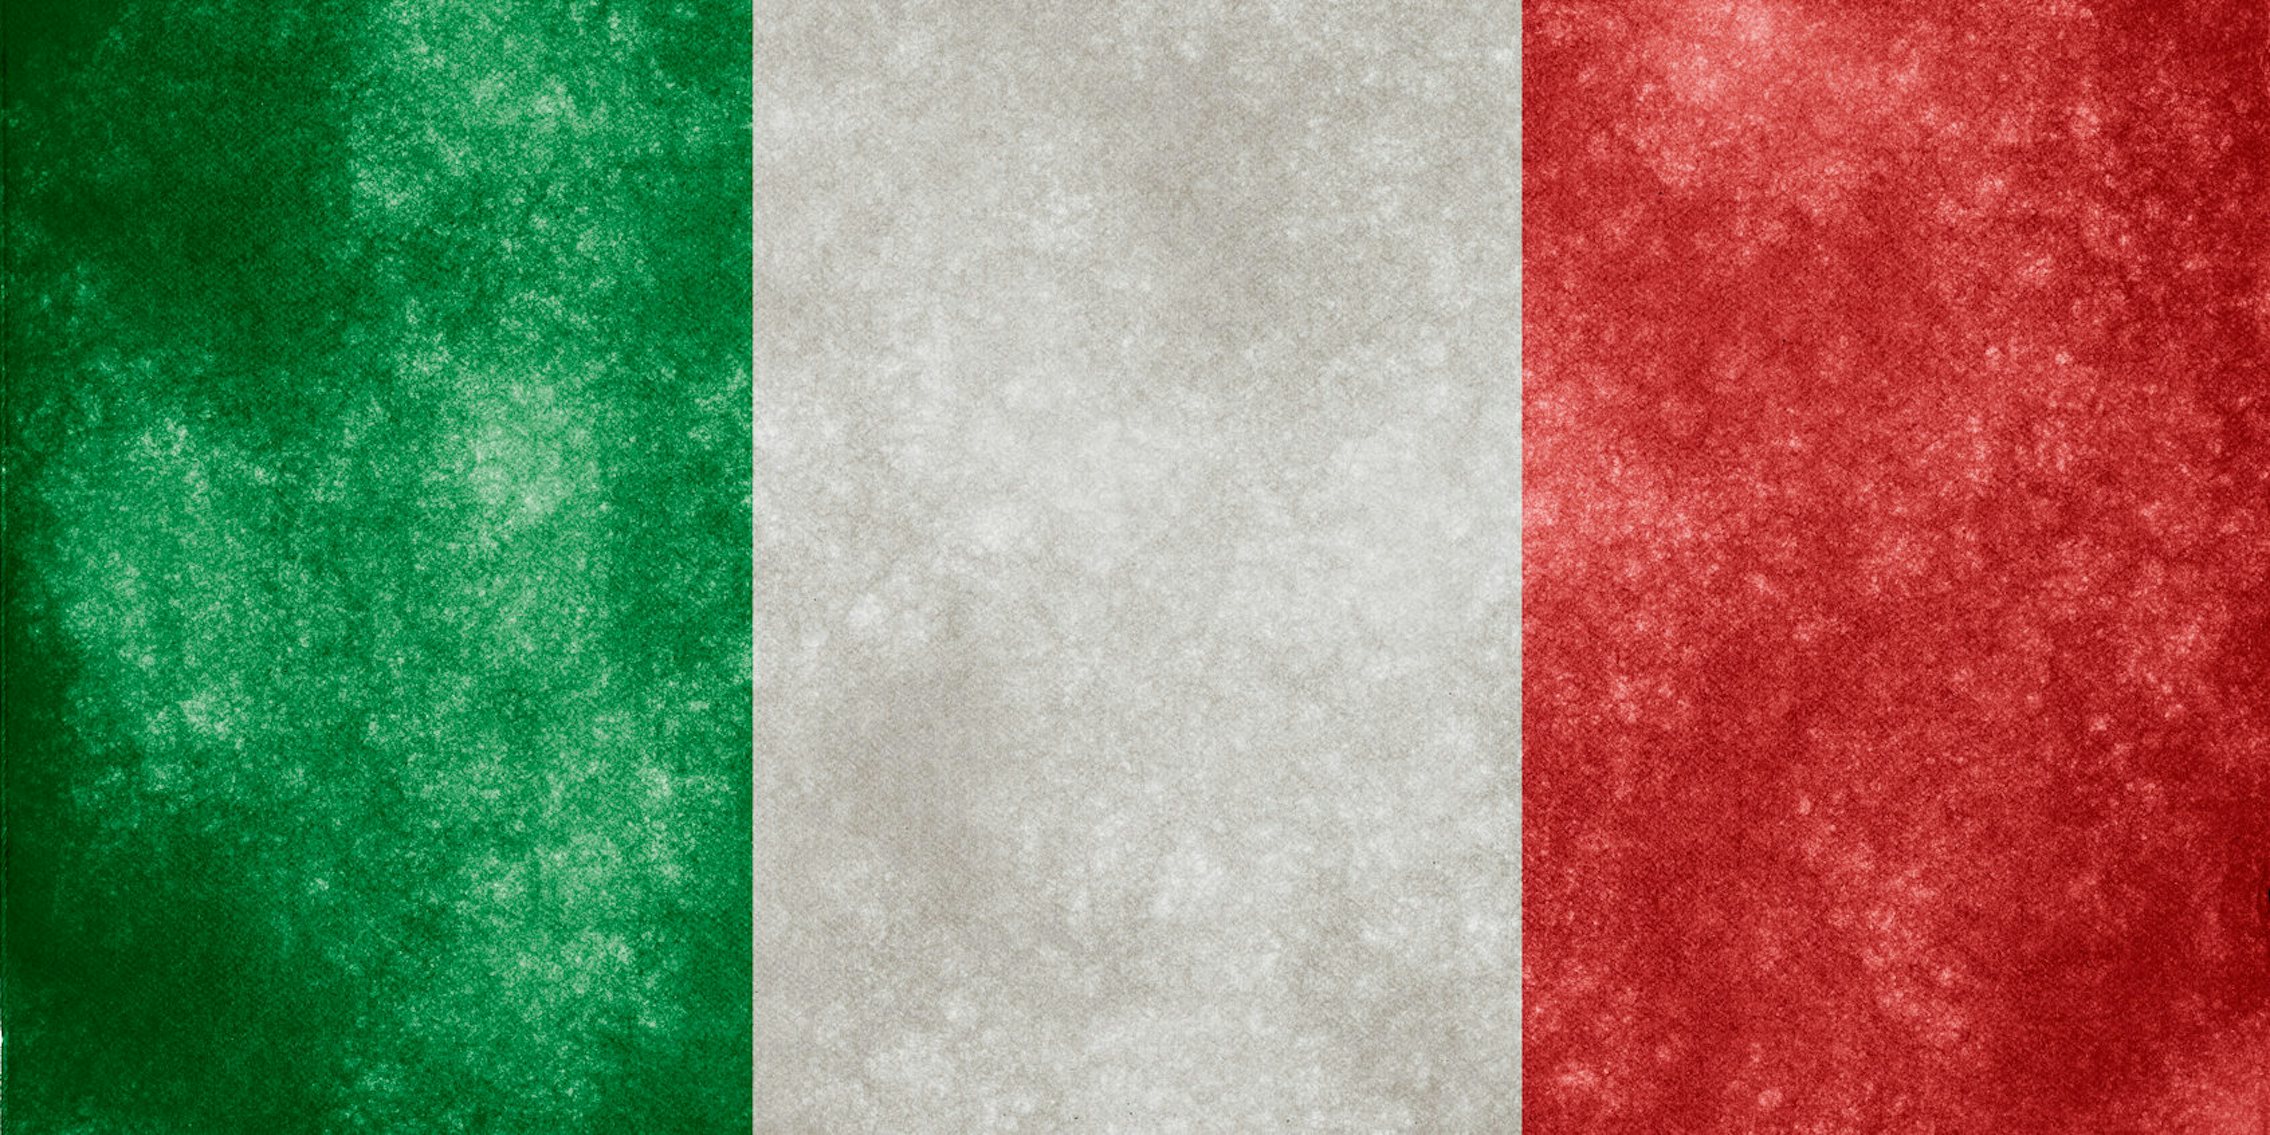 An illustration of a Italy flag.